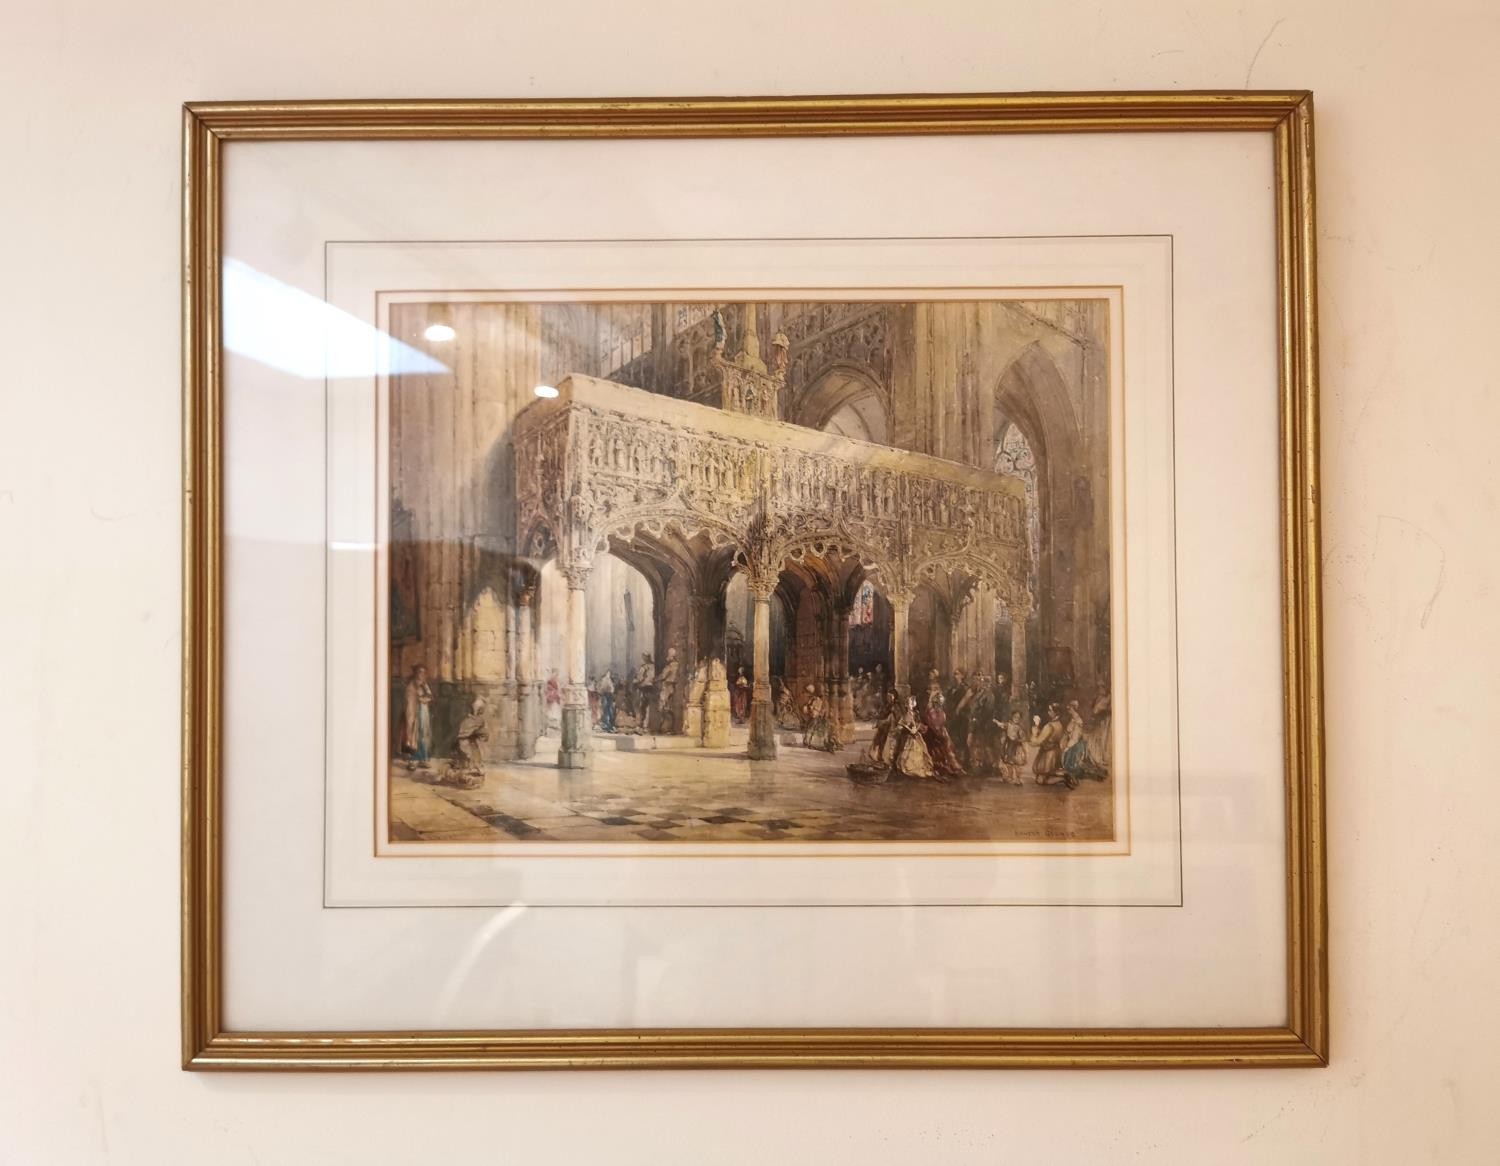 Ernest George, British (1839 - 1922), 19th century watercolour depicting the interior of a - Image 2 of 6